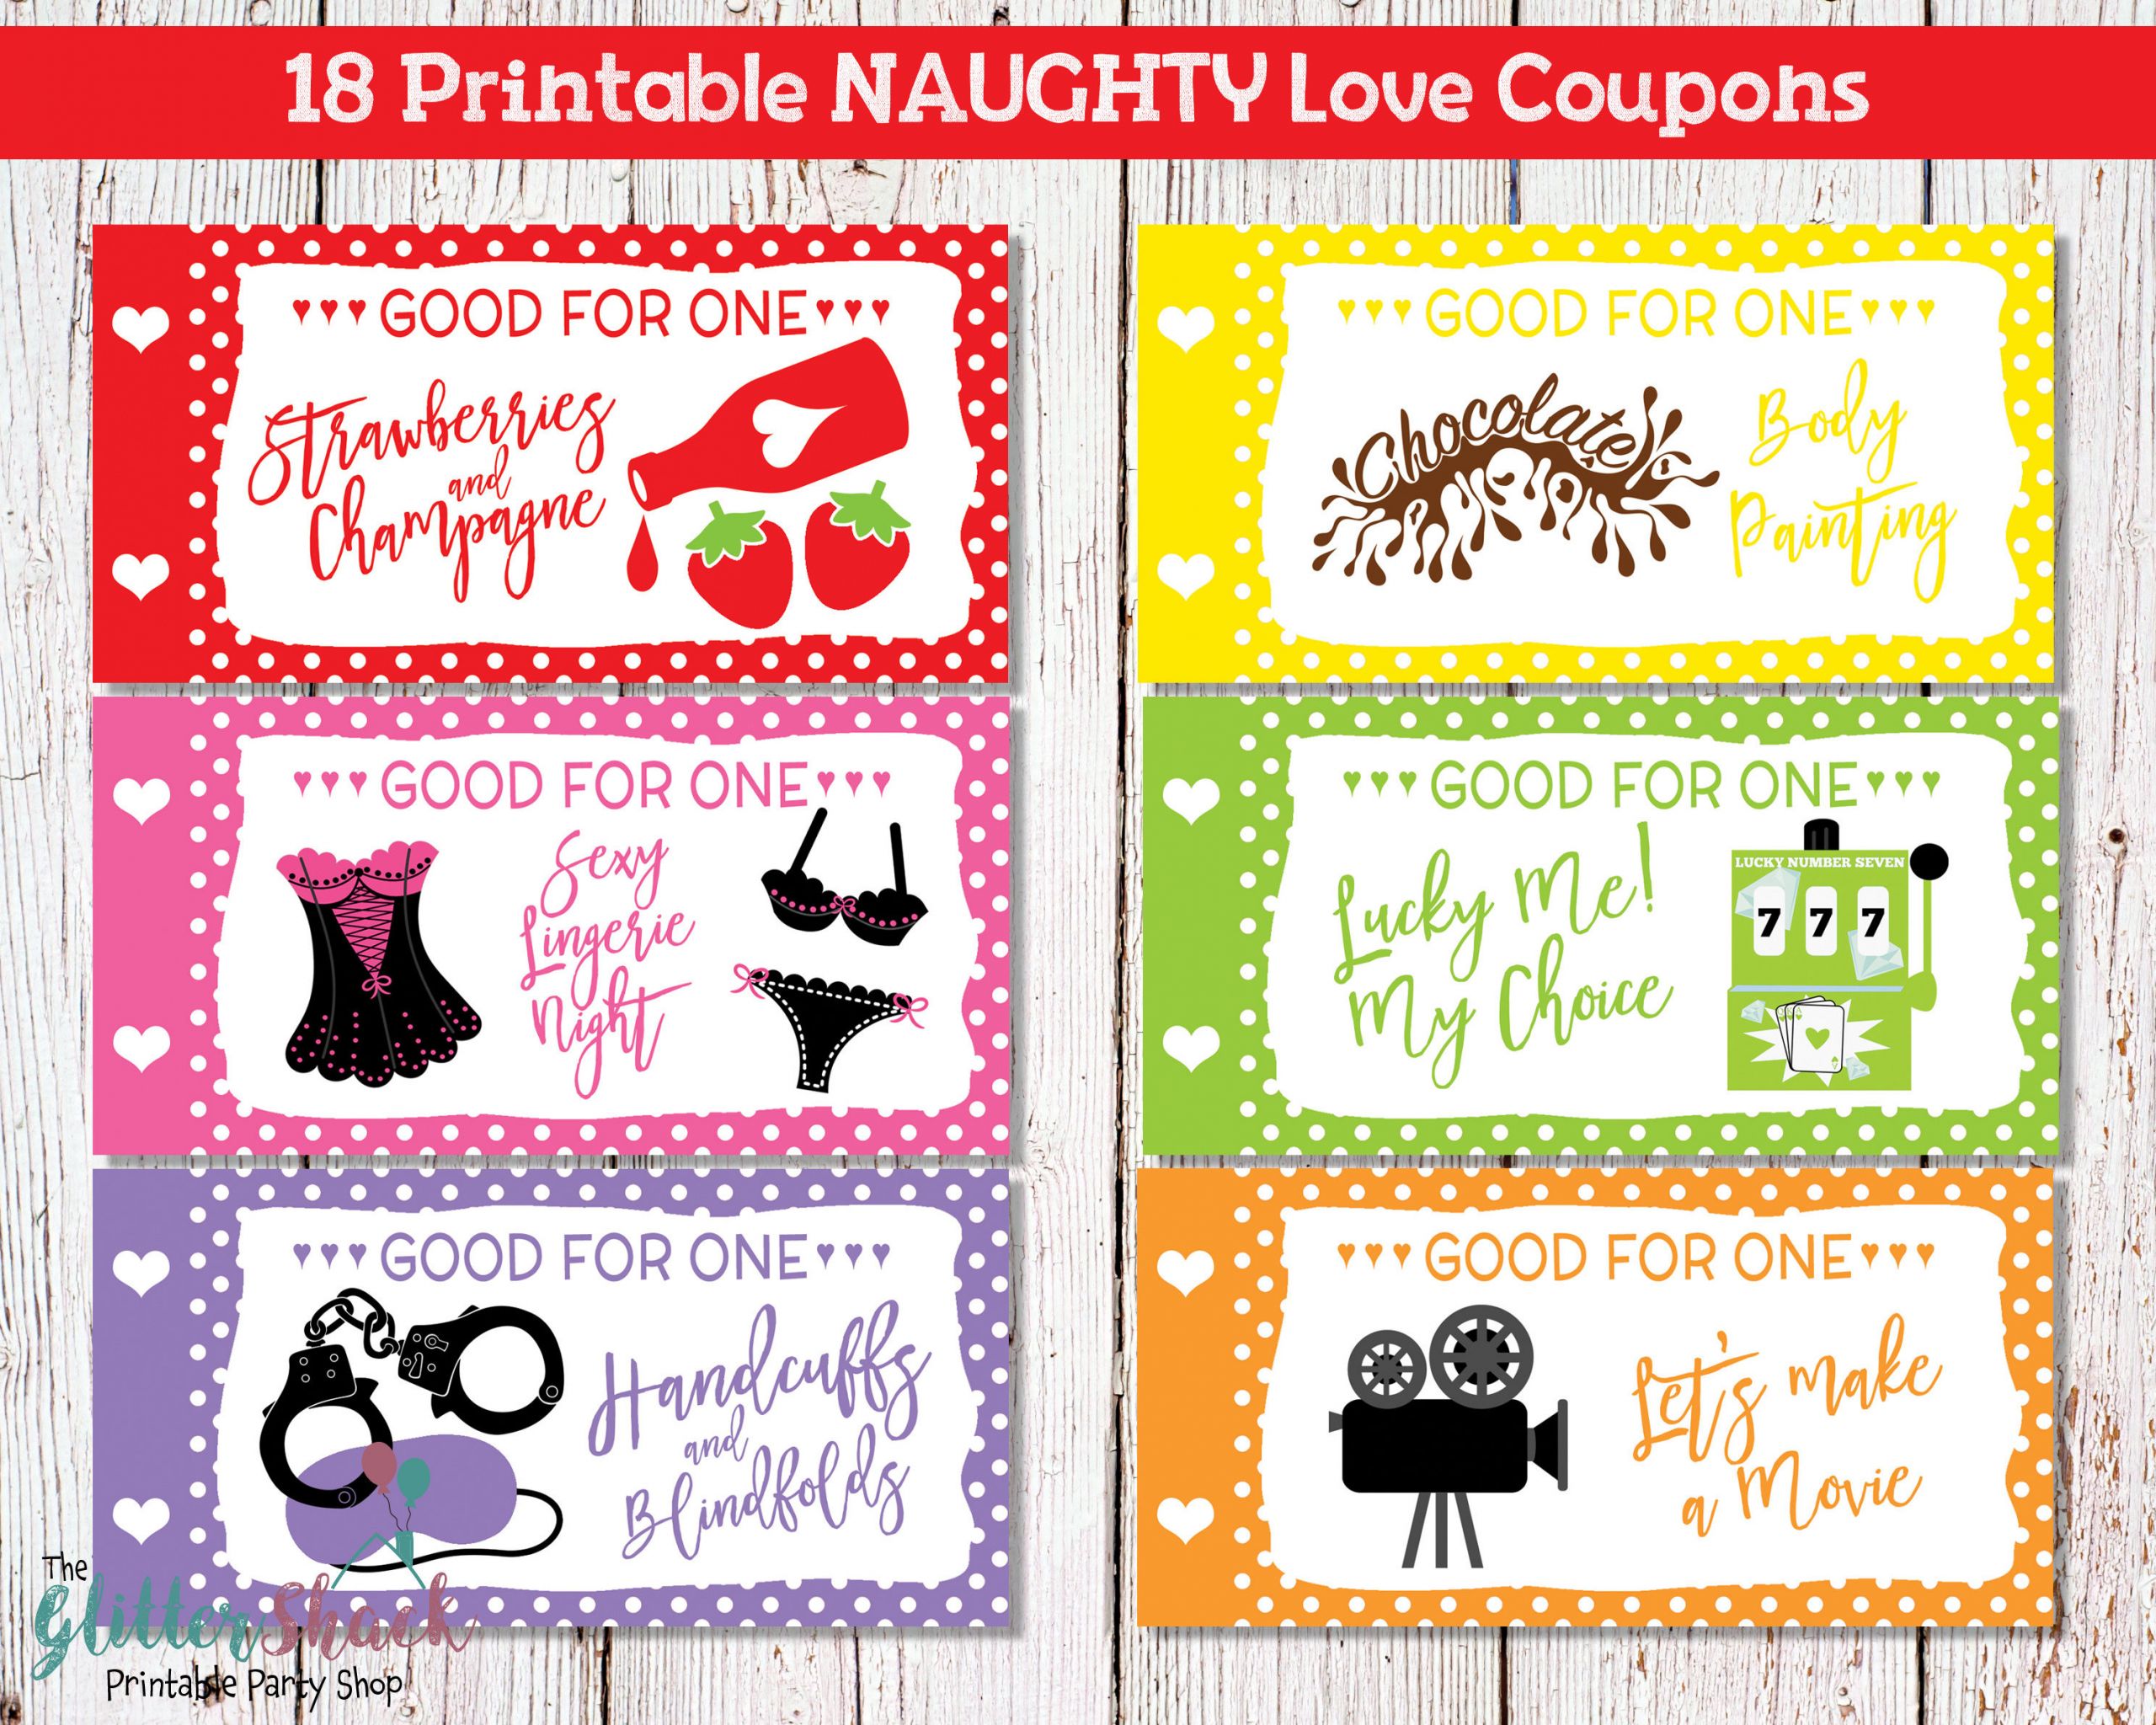 Naughty Gift Ideas For Boyfriend
 Printable Naughty Love Coupons For Men Husband Boyfriend y